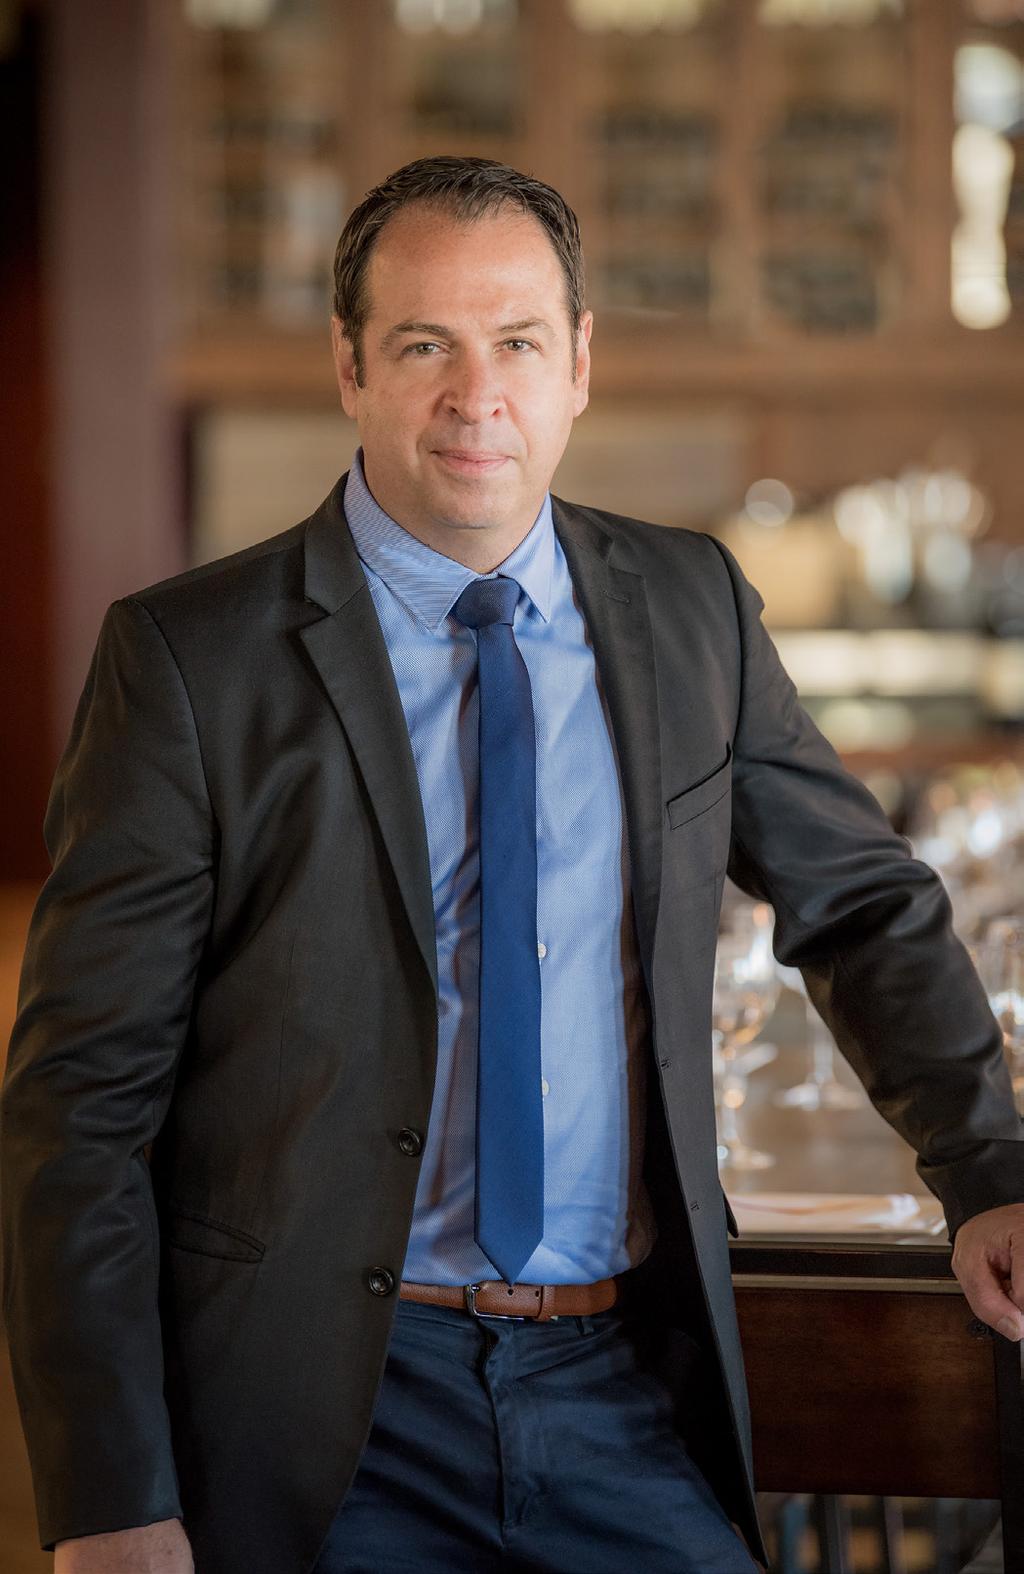 GENERAL MANAGER MARC ELLERT-BECK General Manager Marc Ellert-Beck brings a world of hospitality expertise to his role at Henry at Life Hotel.